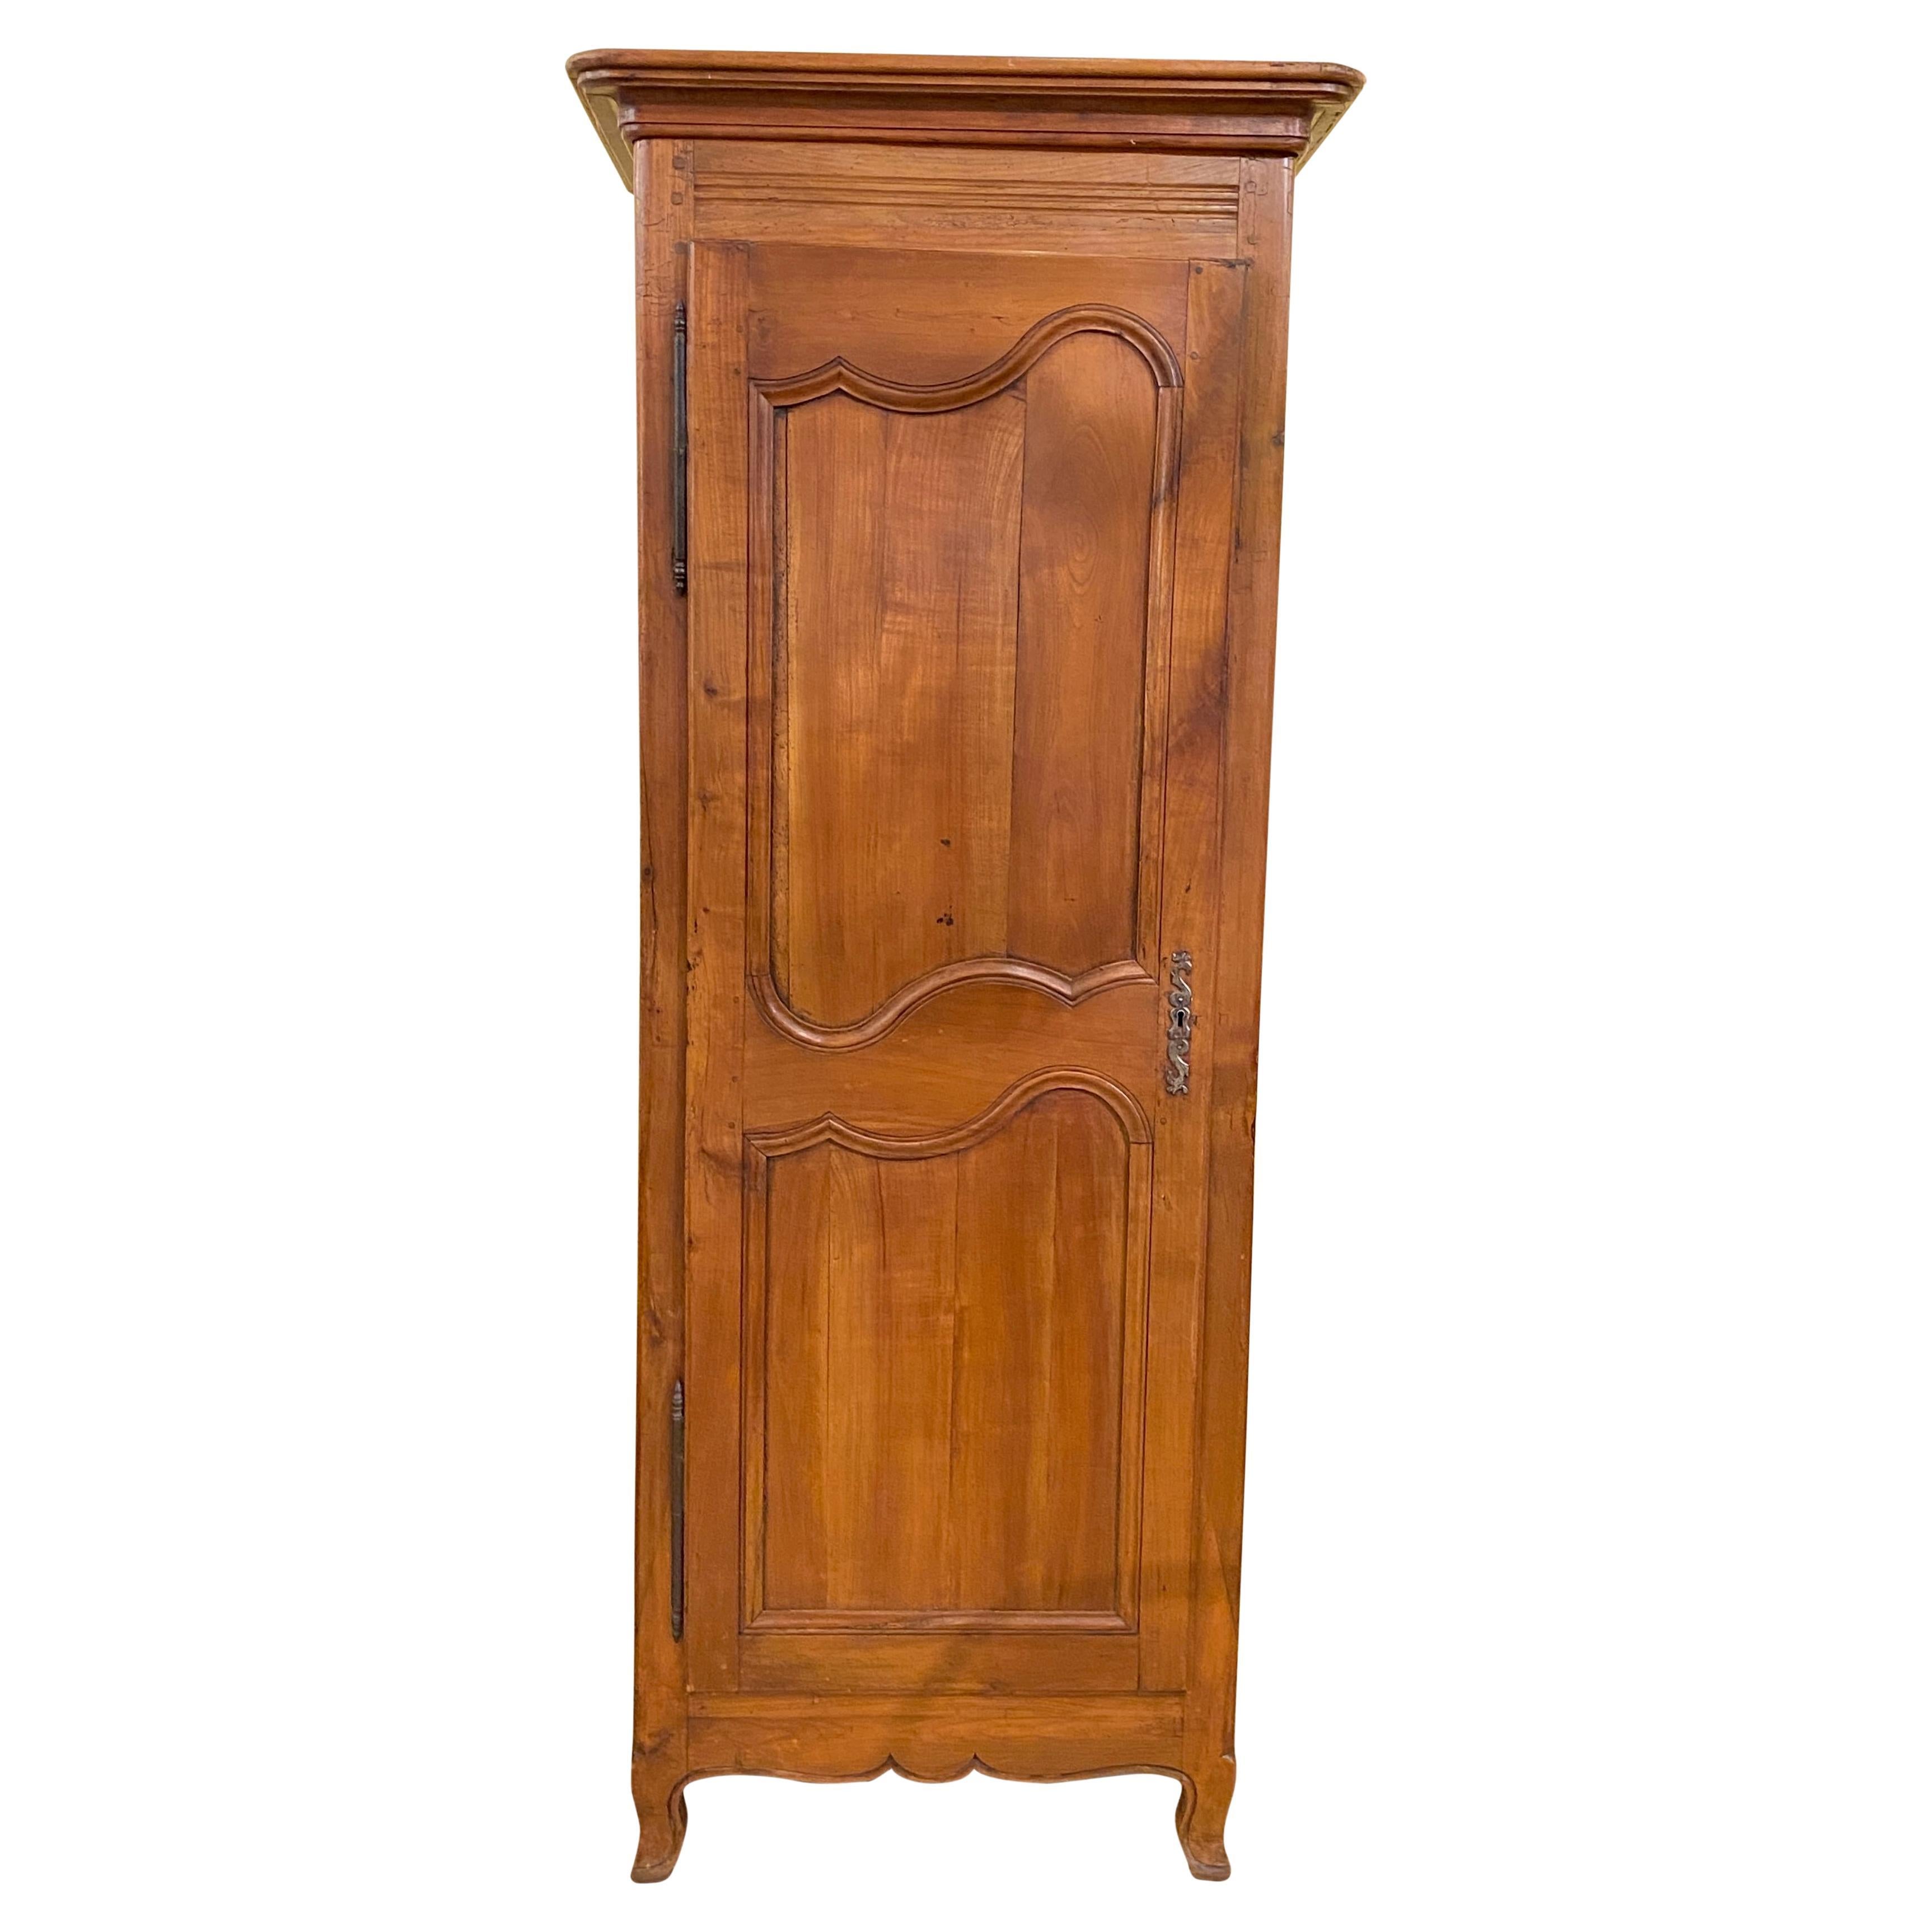 This lovely antique bonnetiere, made of cherry wood with varying tones and textures, was carved and constructed in 18th century France, circa 1750. This cabinet features a single tall door with adjustable interior shelves. The door is decorated with